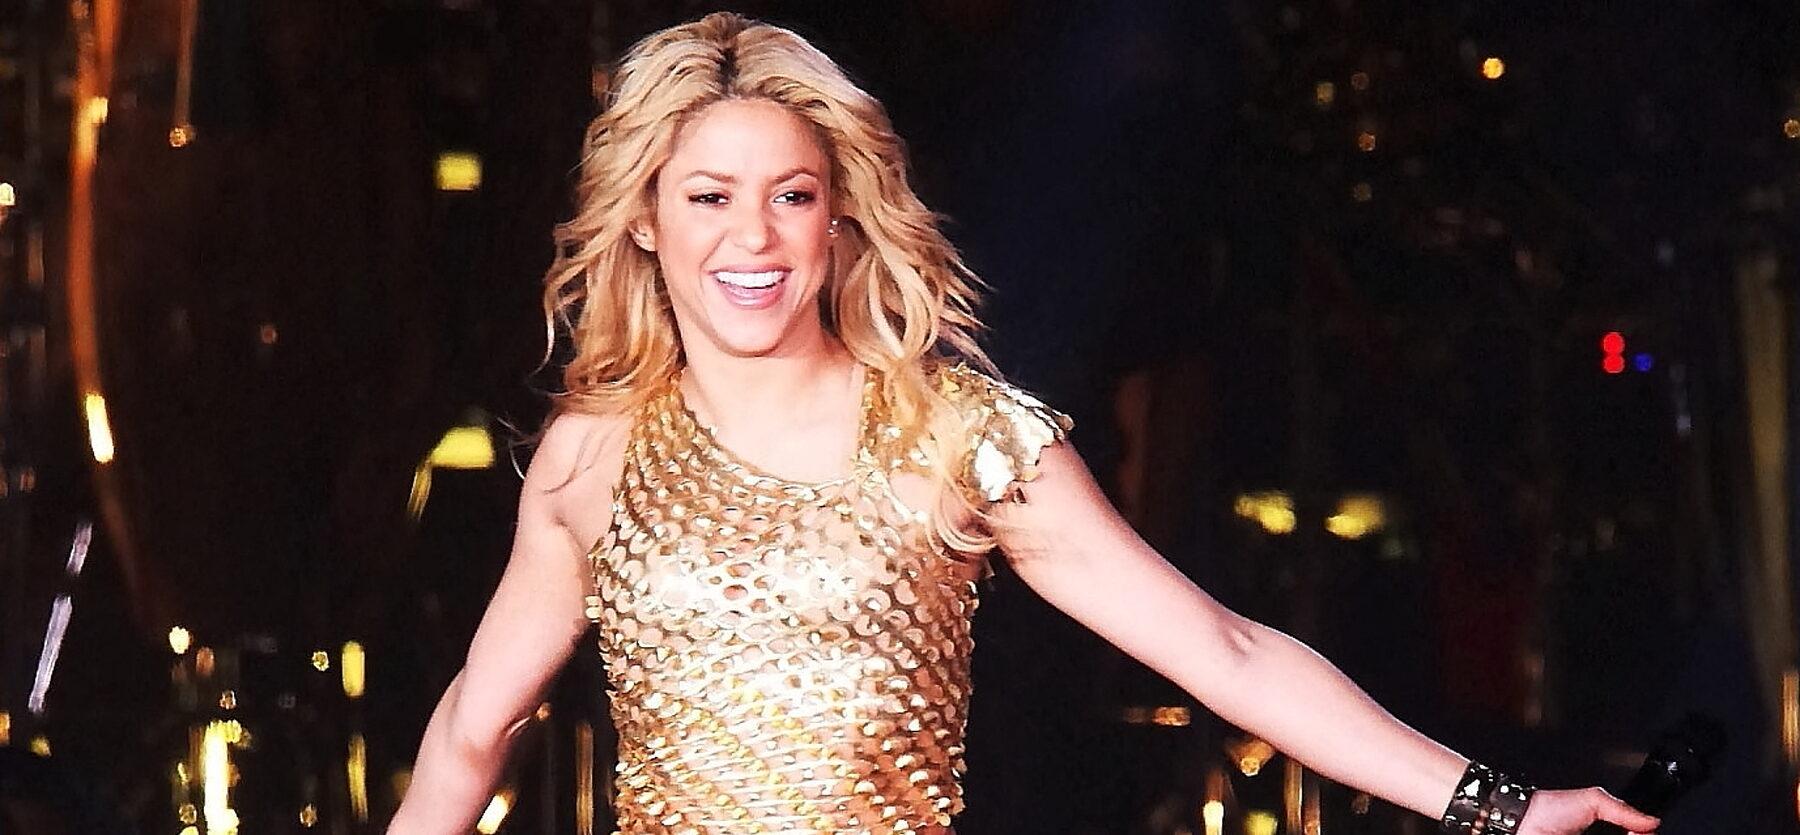 Colombian superstar Shakira in serious fiscal troubles in Spain File images